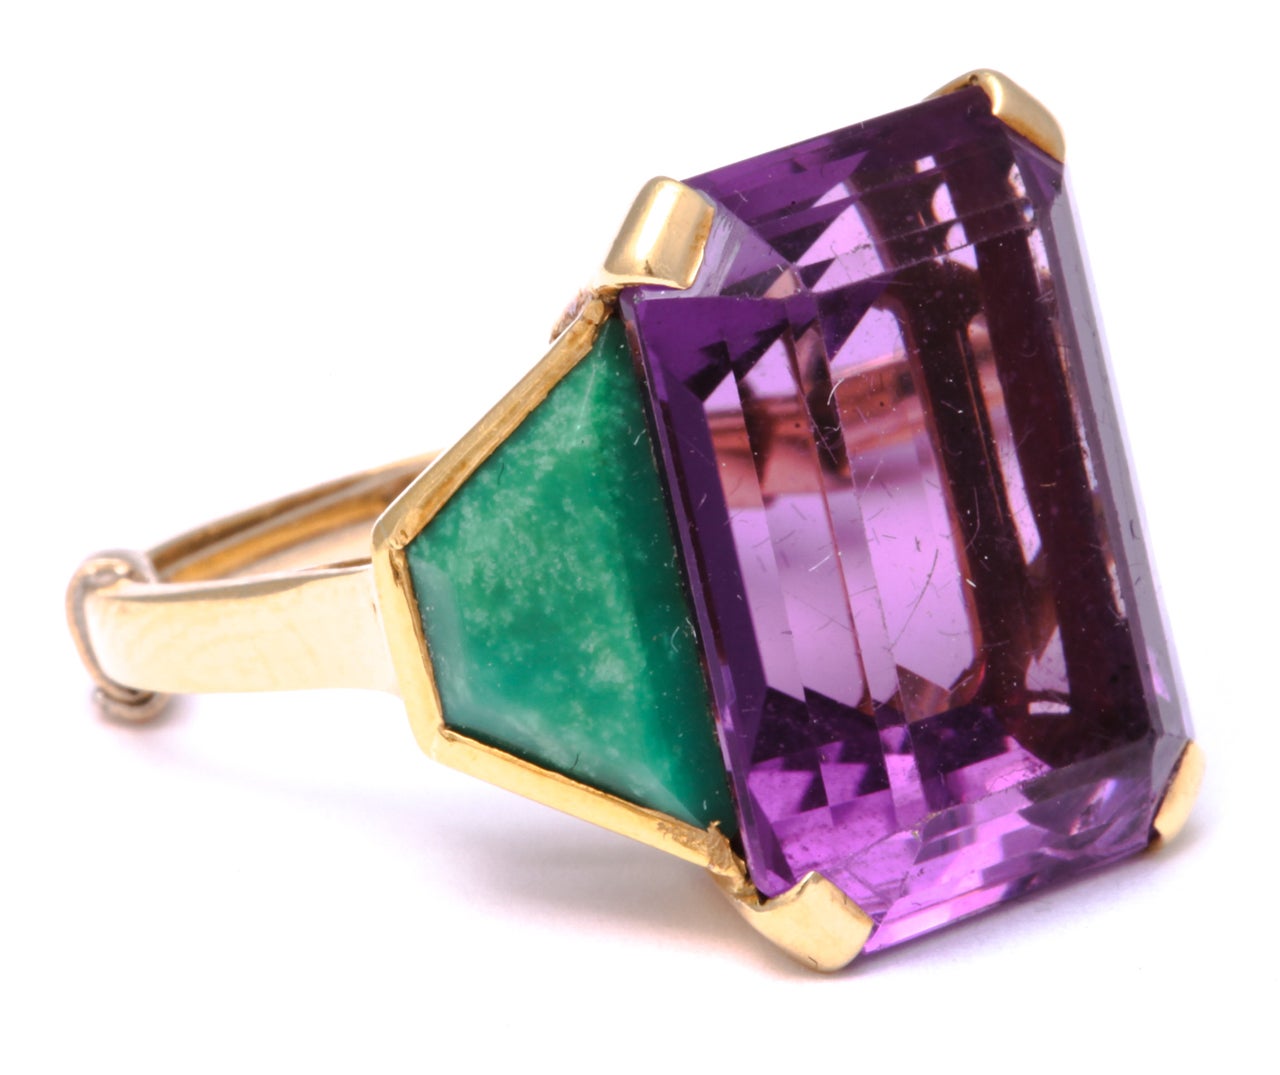 Women's Stunning Retro Amethyst Ring with Amazonite Baguettes